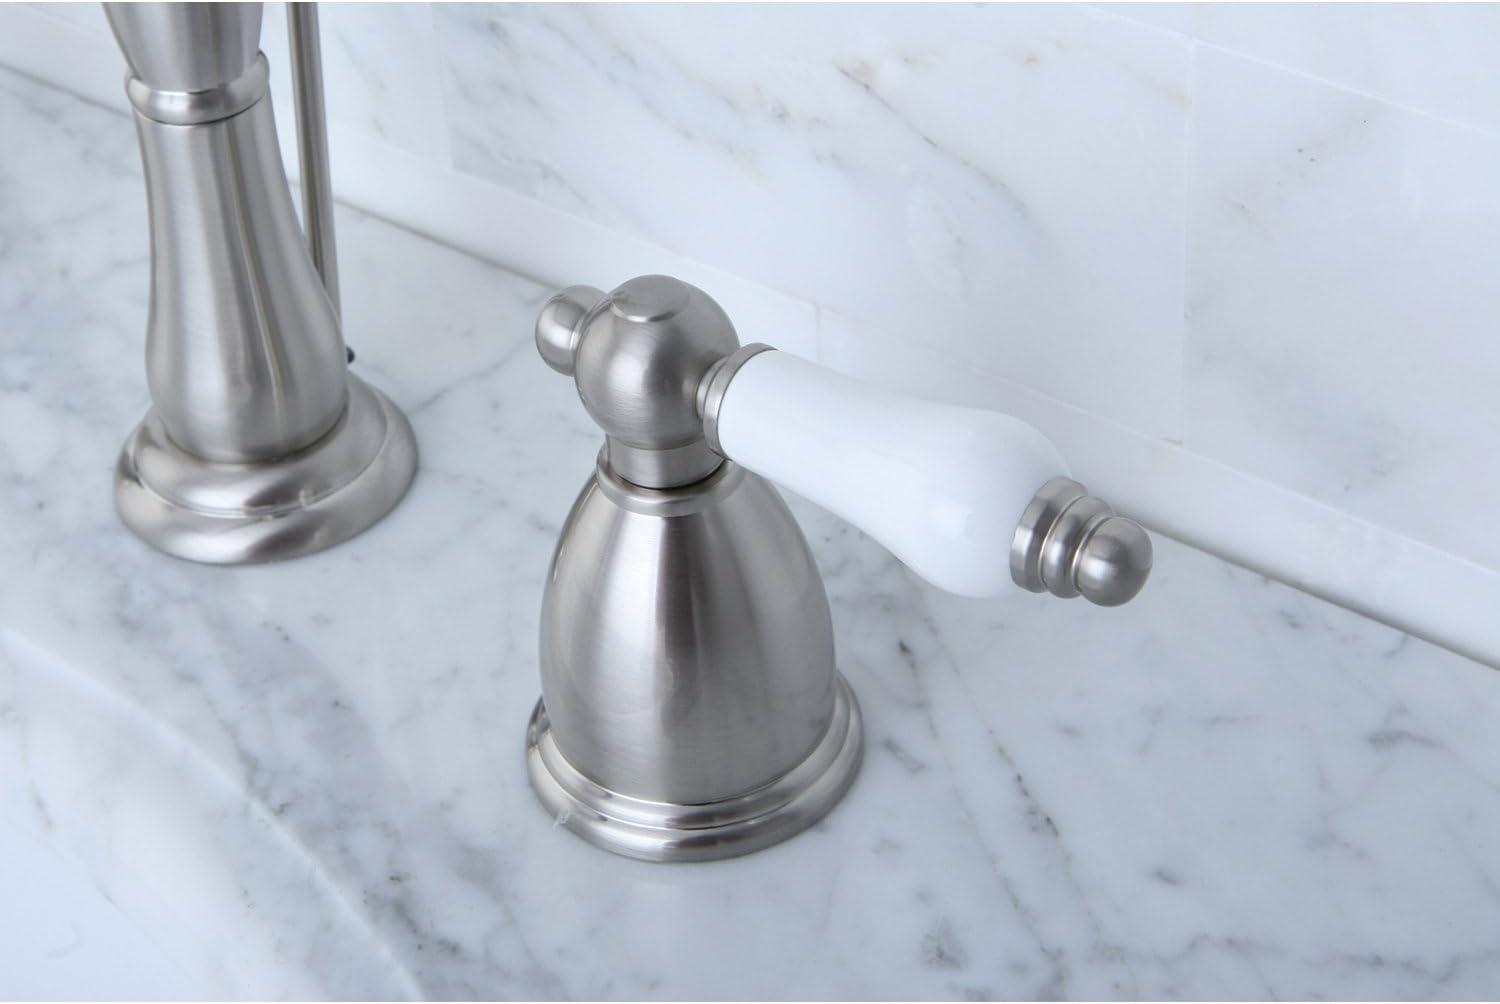 Heritage Brushed Nickel Widespread Lavatory Faucet with Porcelain Lever